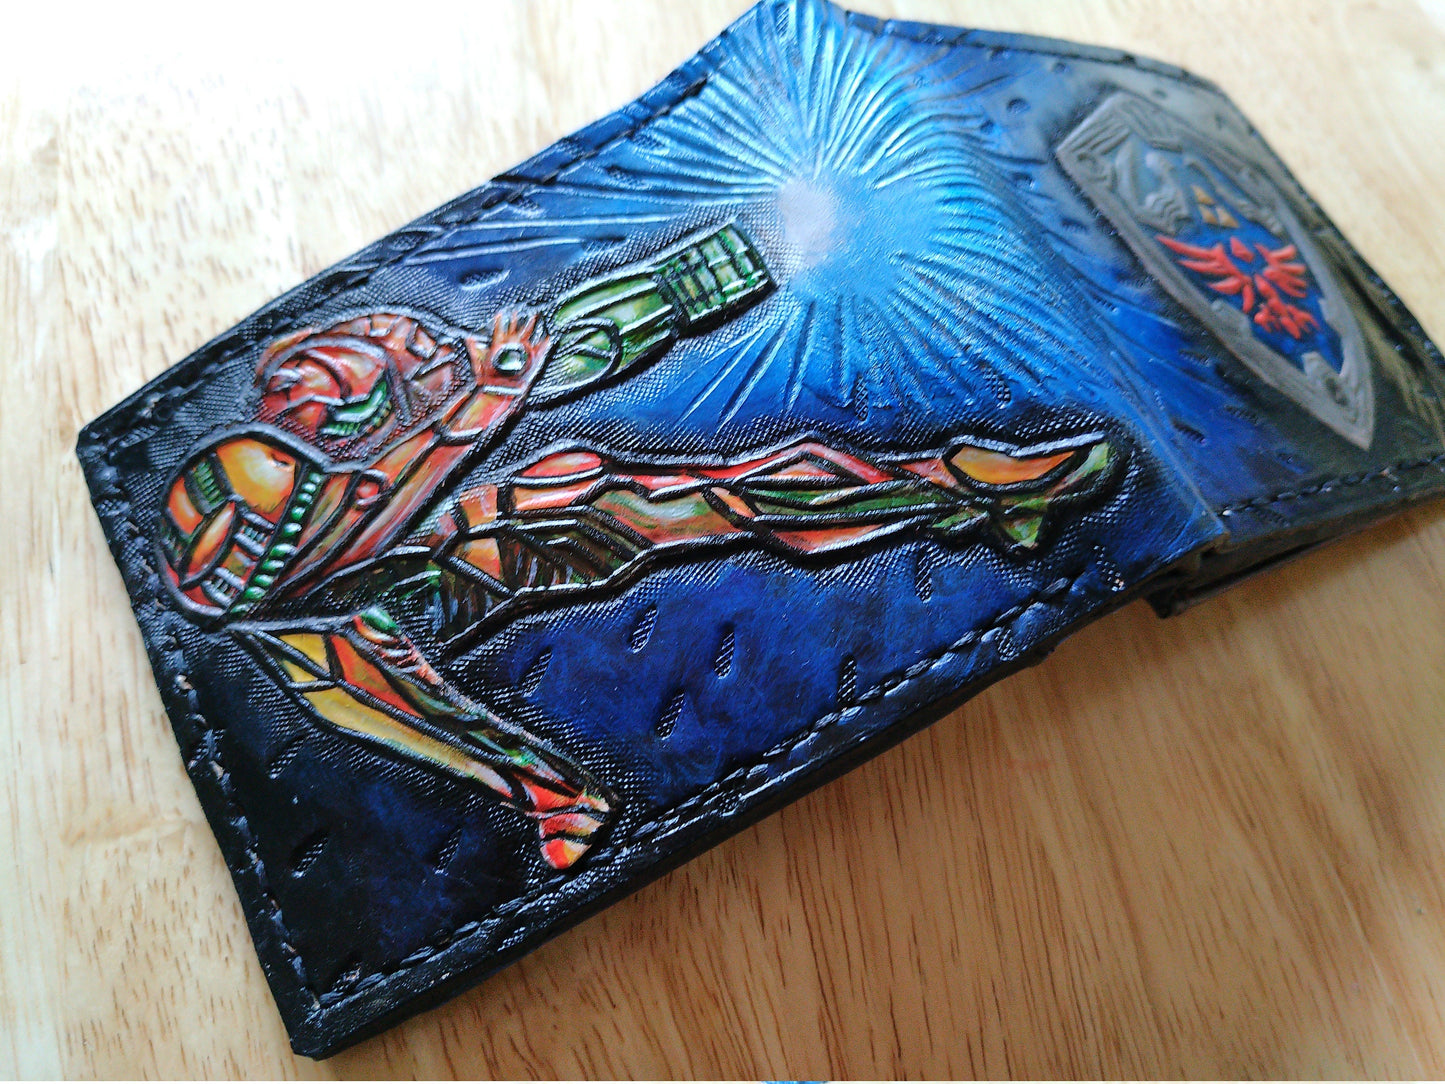 Super Metroid - Hyrule shield - Leather Bifold Wallet - Handcrafted Wallet -